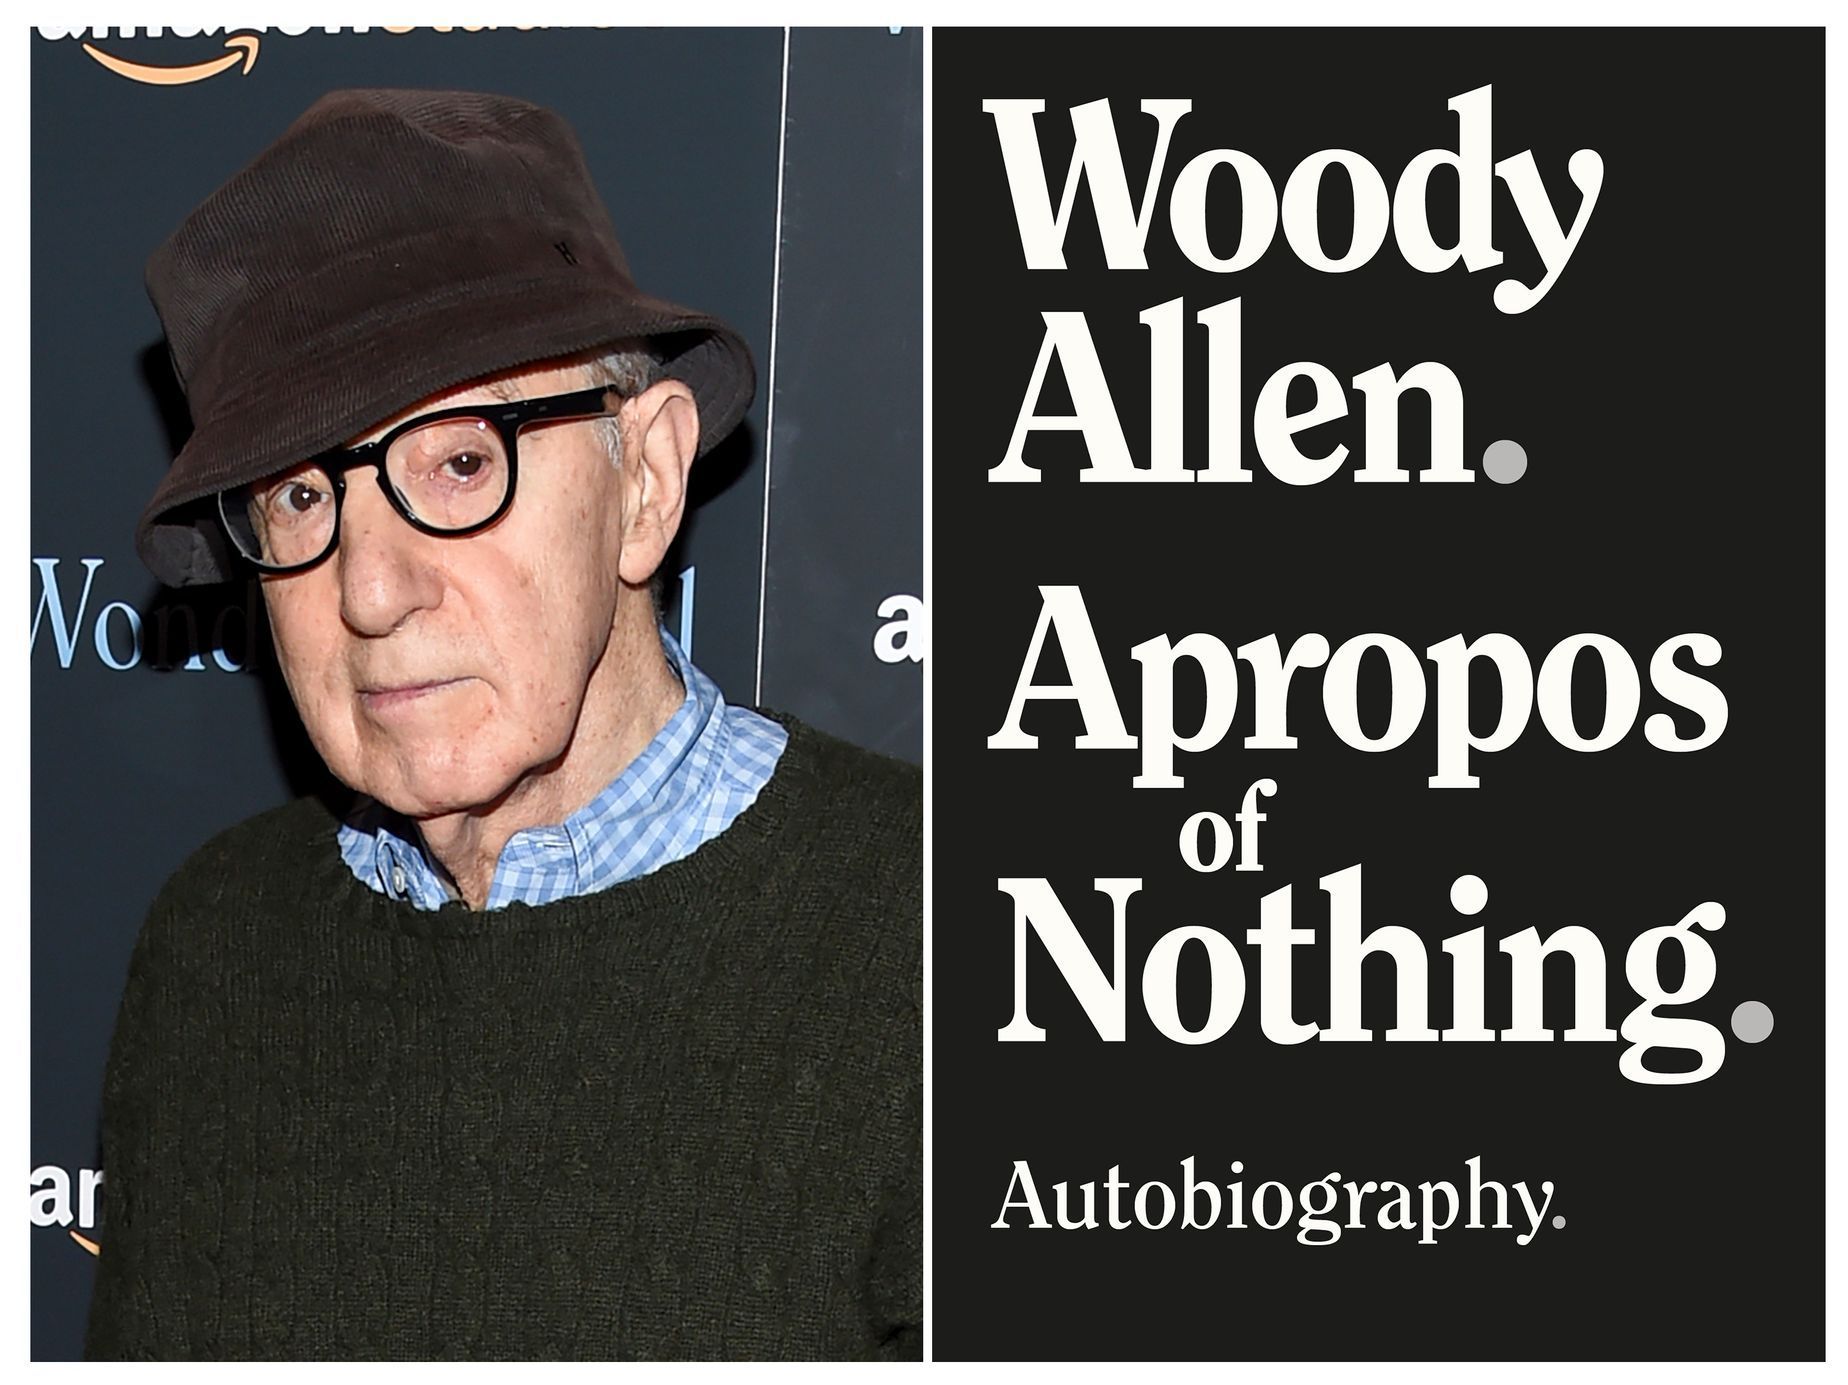 Woody Allen: Apropos of Nothing